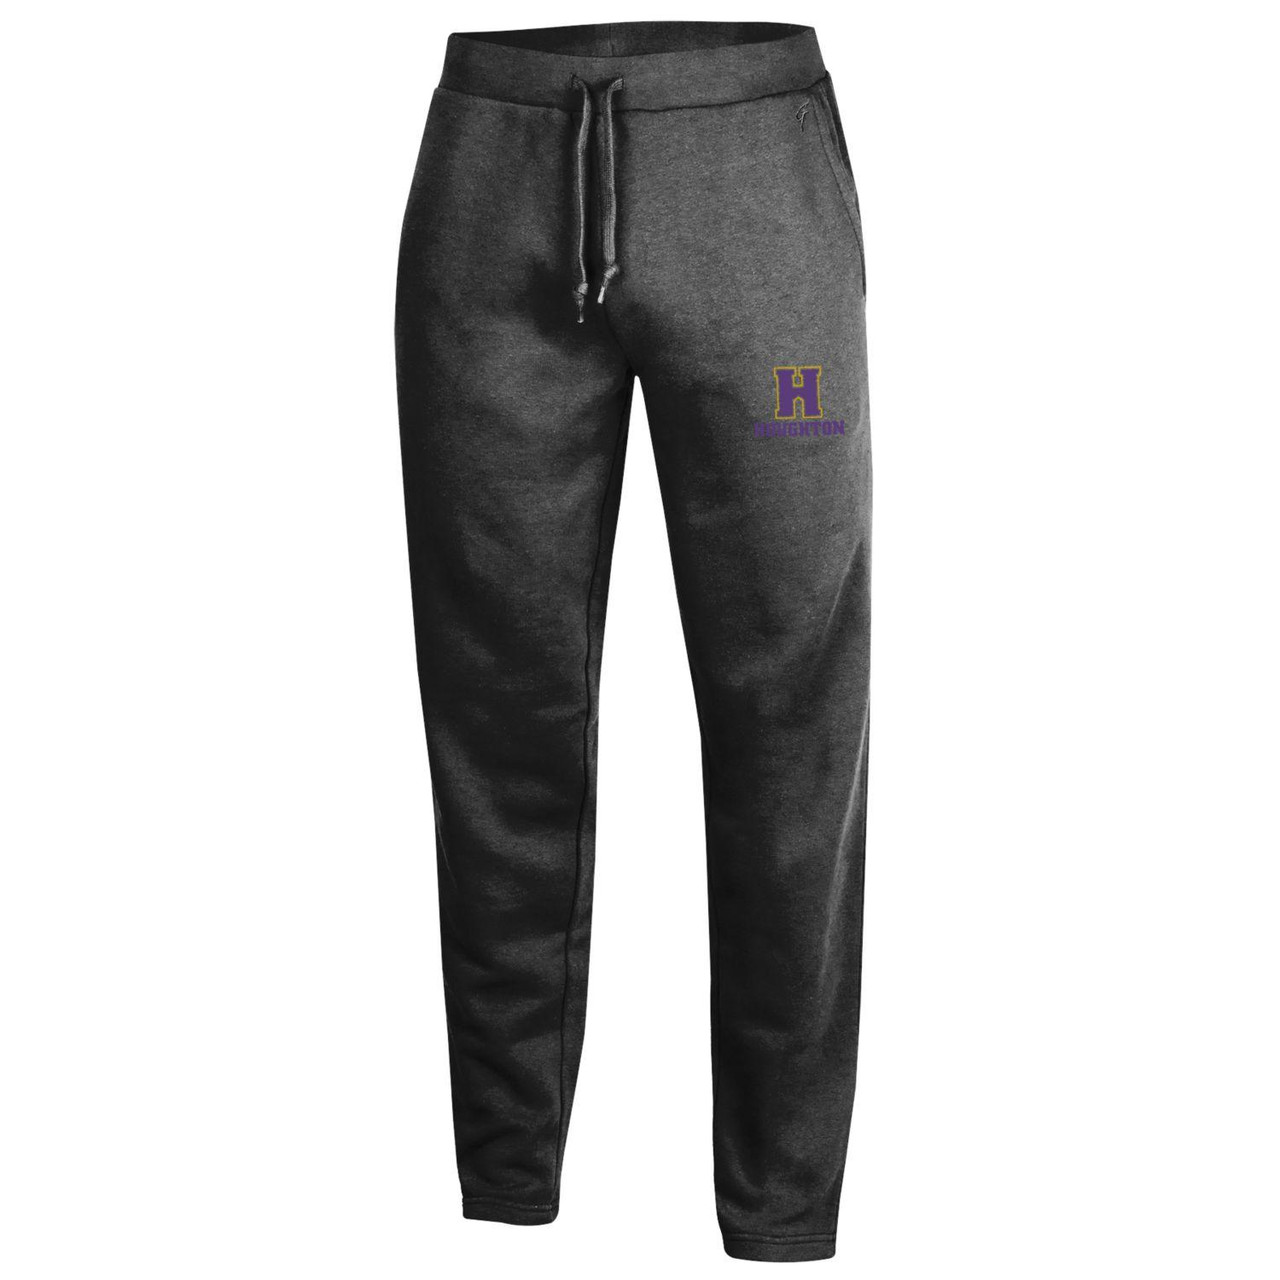 Houghton Athletic Sweatpants - The Highlanders Shop